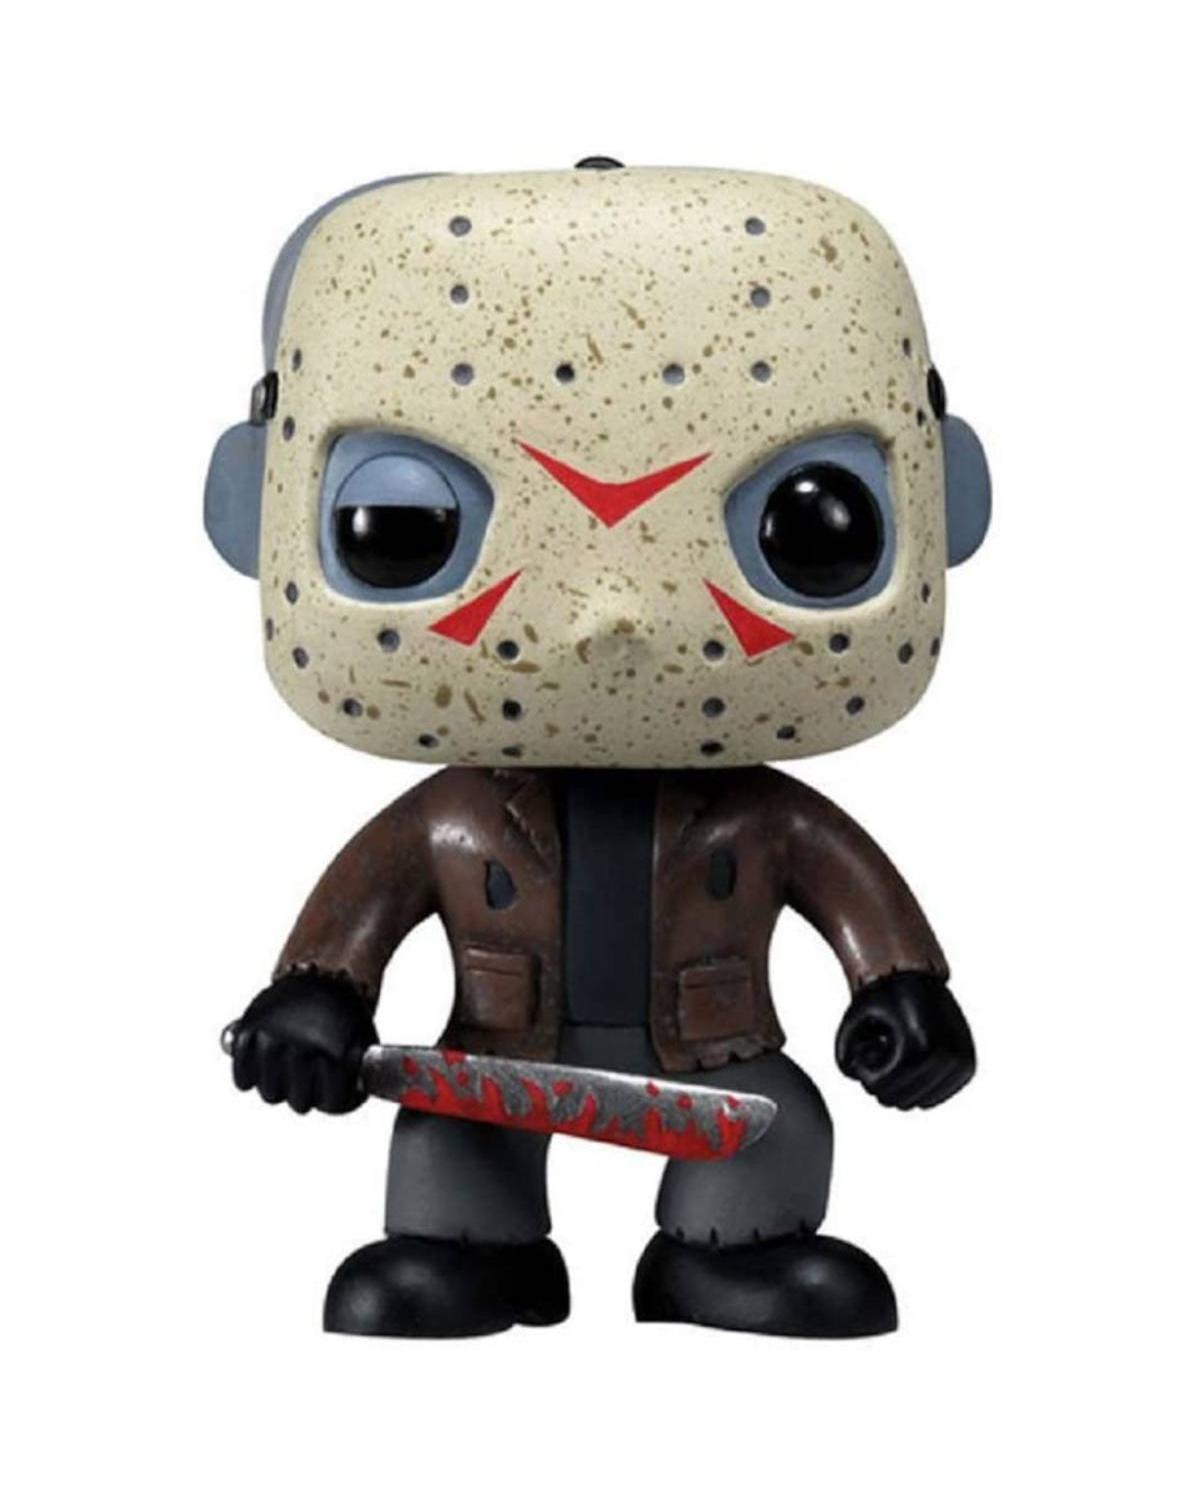 POP! FRIDAY THE 13TH - JASON VOORHEES #01 - FUNKO